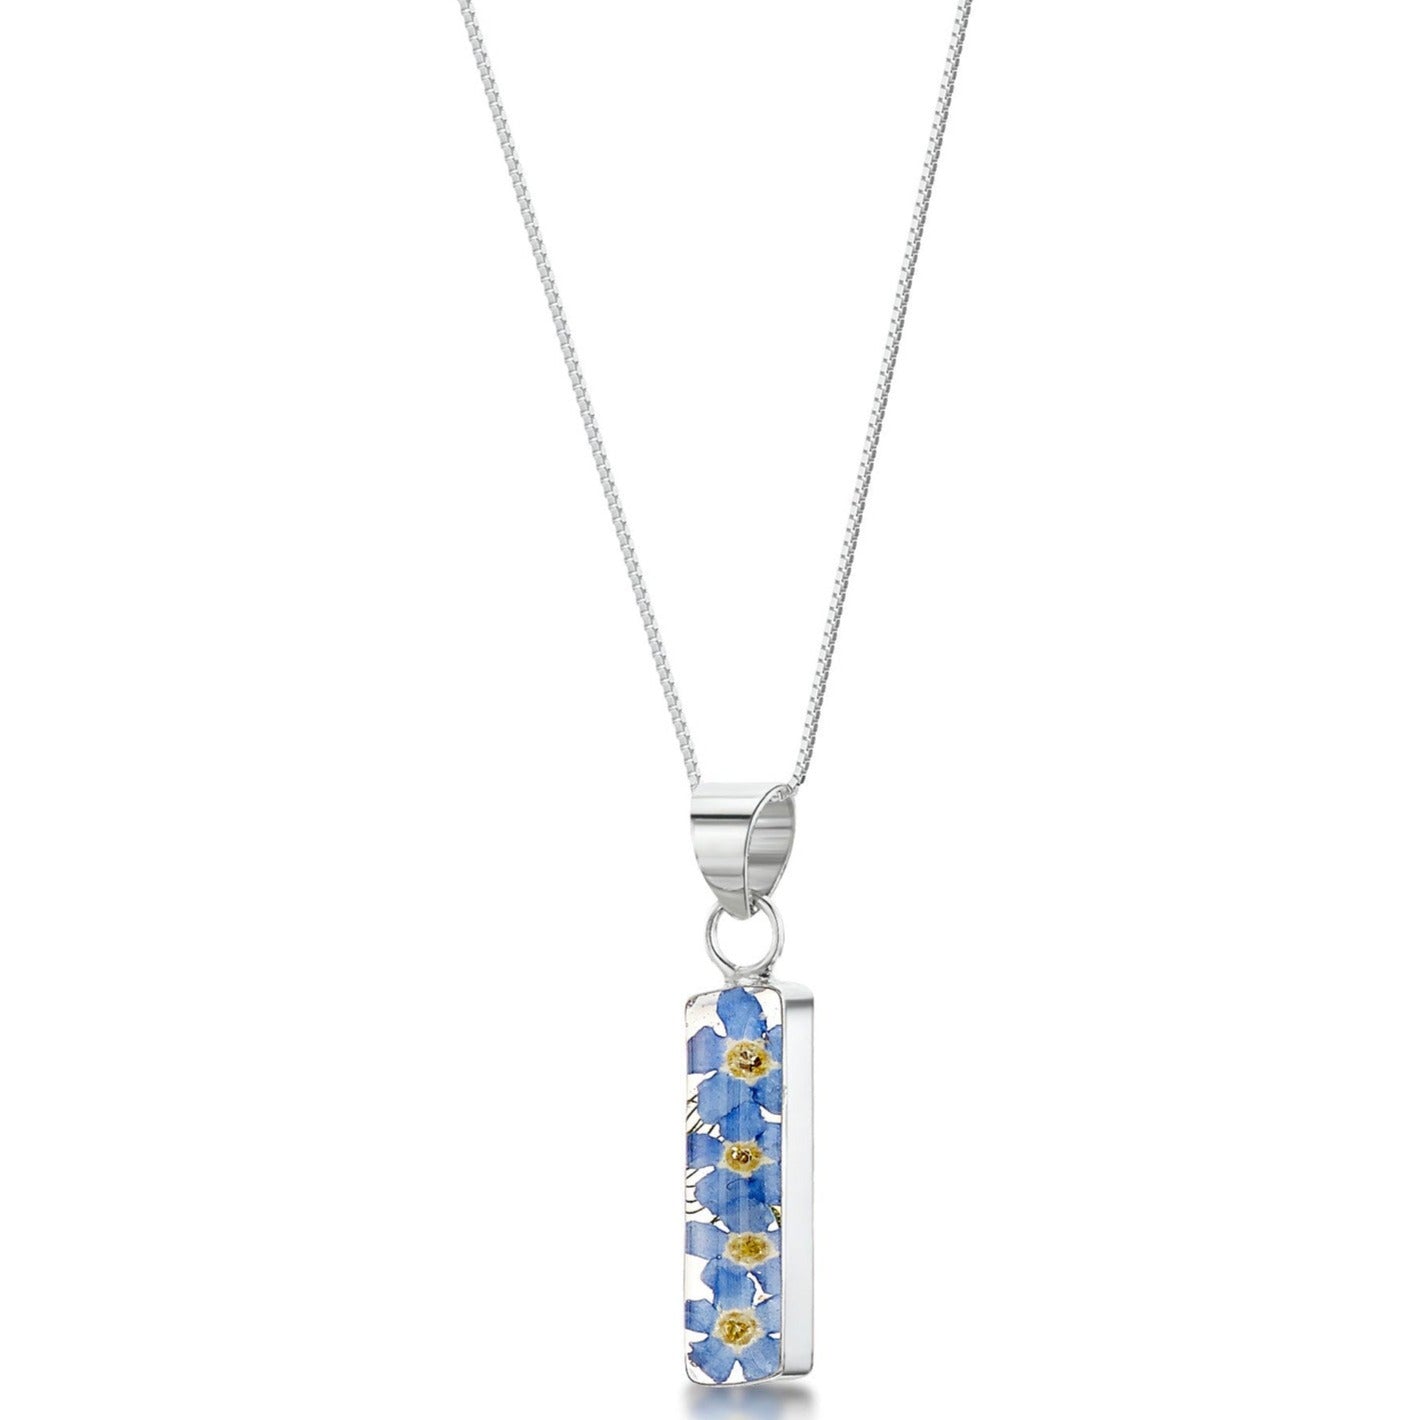 Sterling silver rectangle bar pendant with real forget-me-not flowers set in resin. Hangs on an 18" adjustable sterling silver chain.